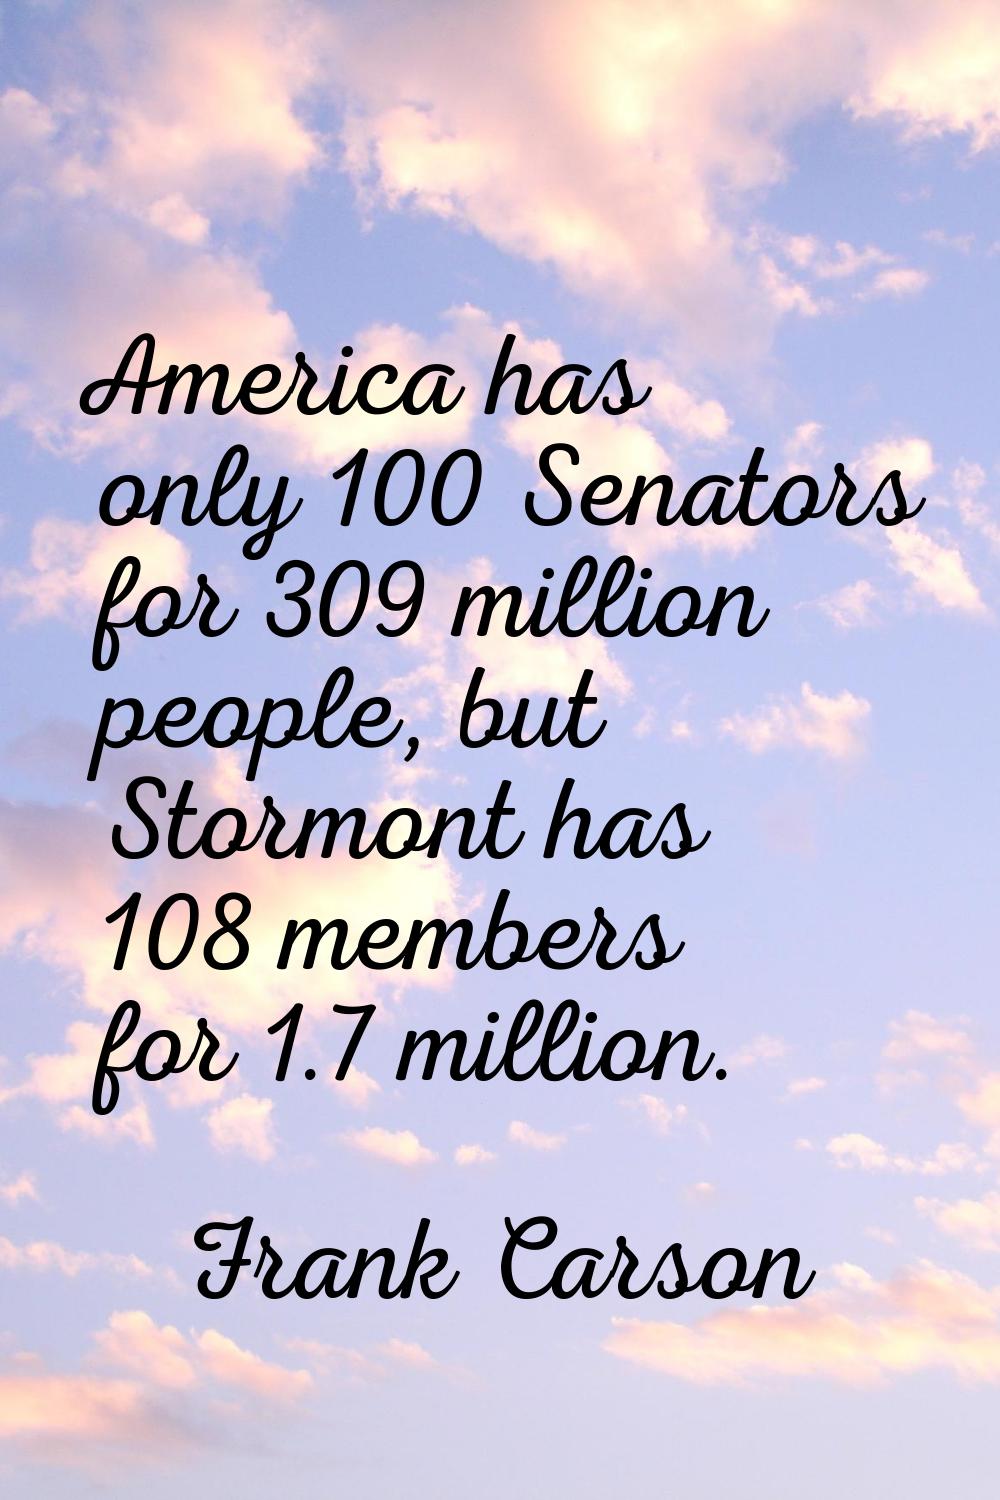 America has only 100 Senators for 309 million people, but Stormont has 108 members for 1.7 million.